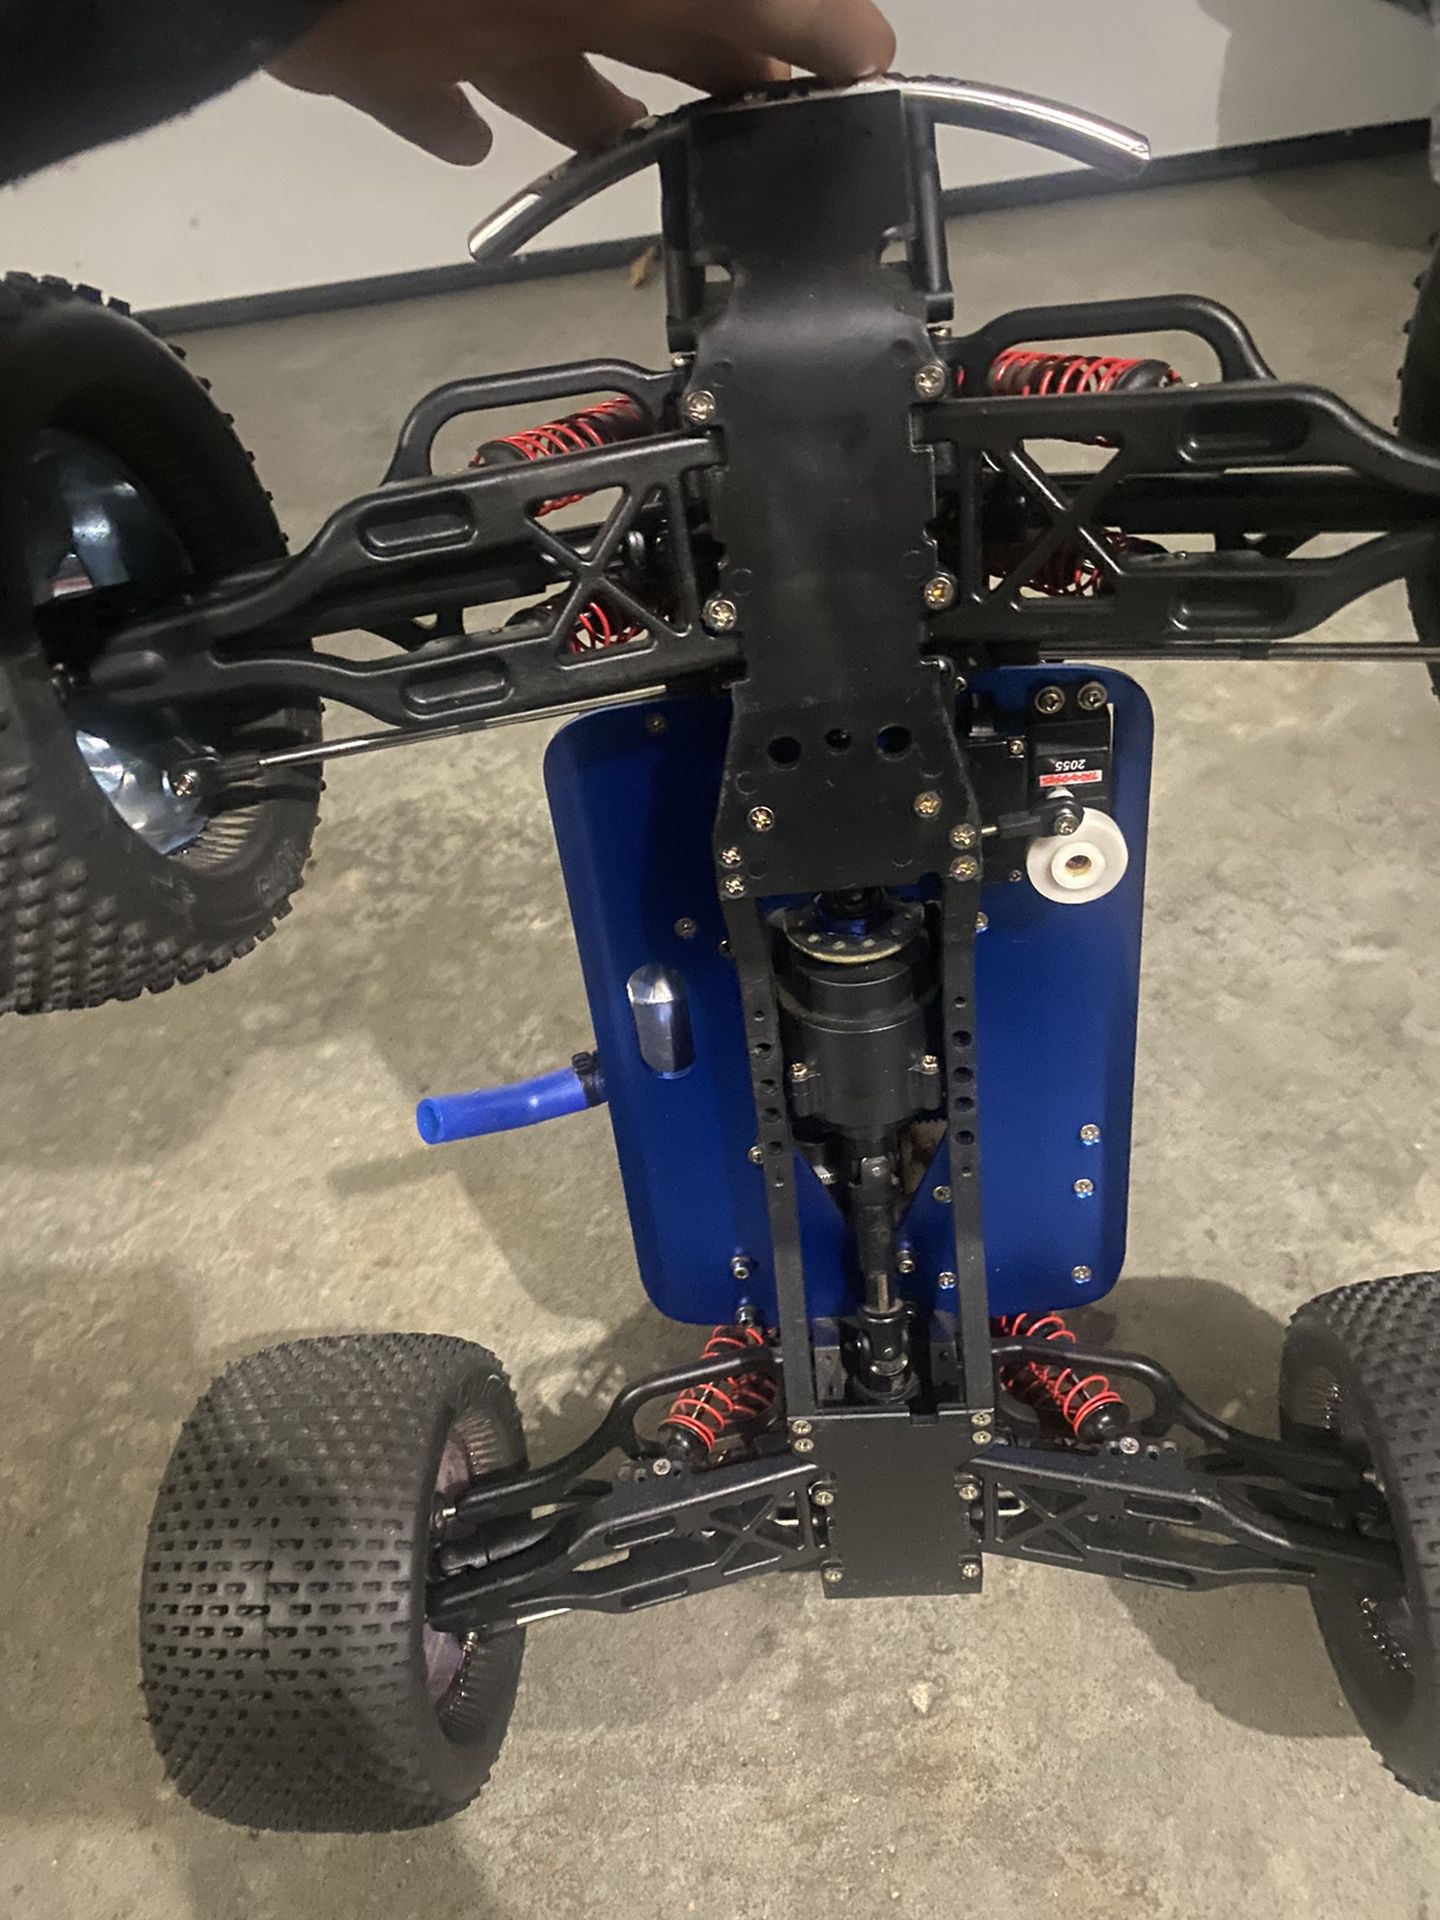 Traxxas Tmaxx Like new Rtr! Open To Local Trades For Other Rc’s